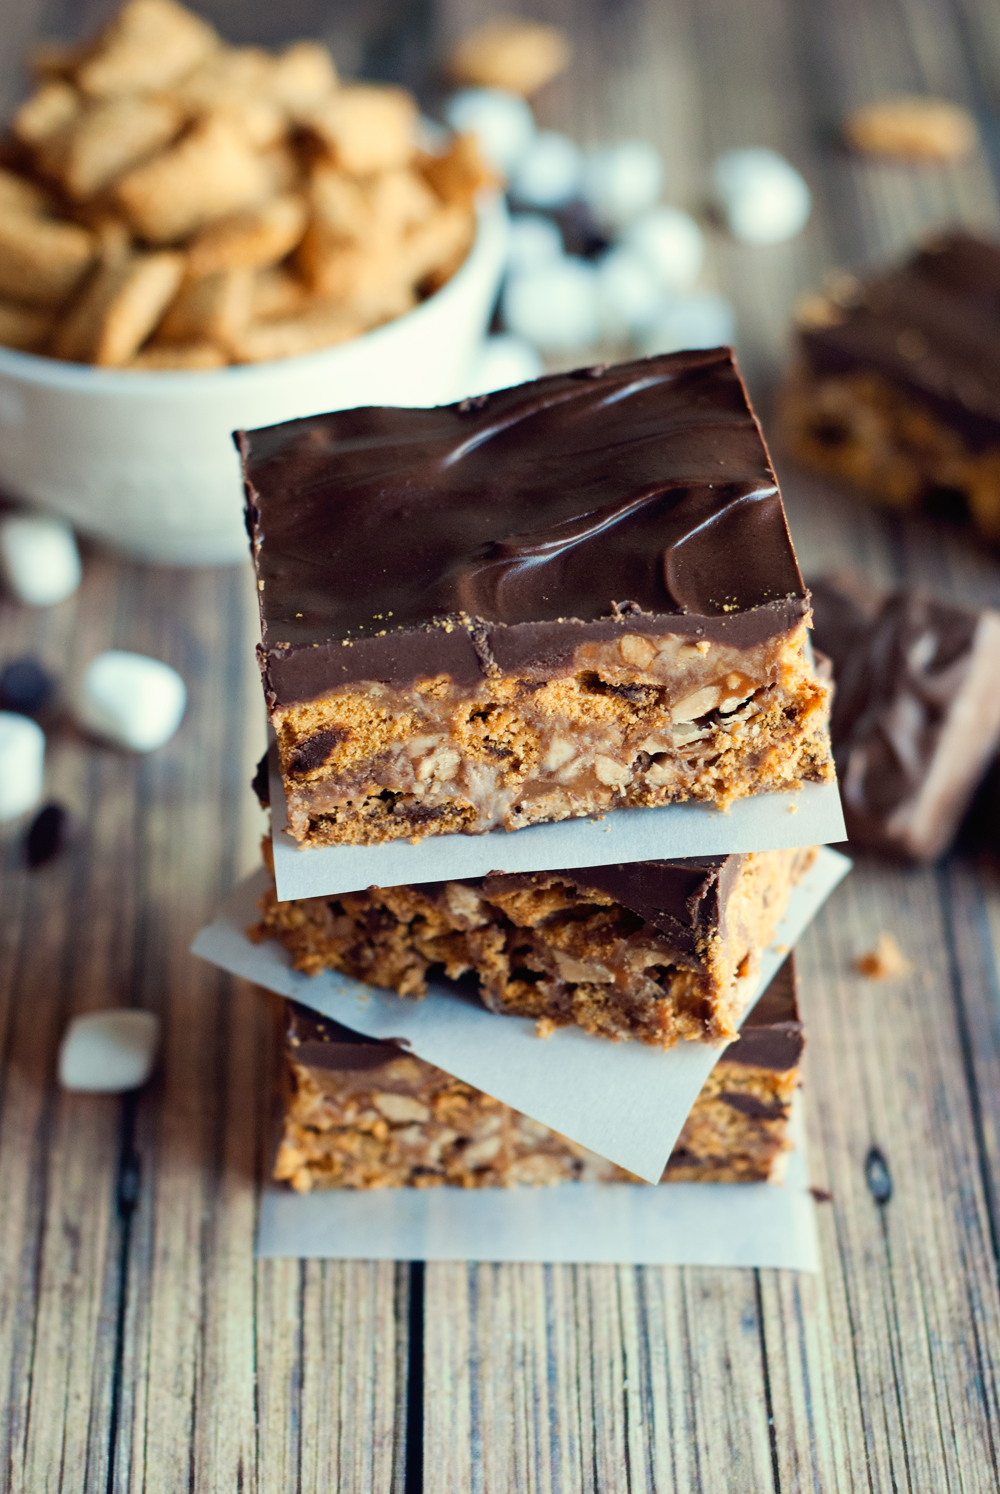 Snickers Cereal Bars by Three in Three #Chocolate4TheWin #shop #cbias